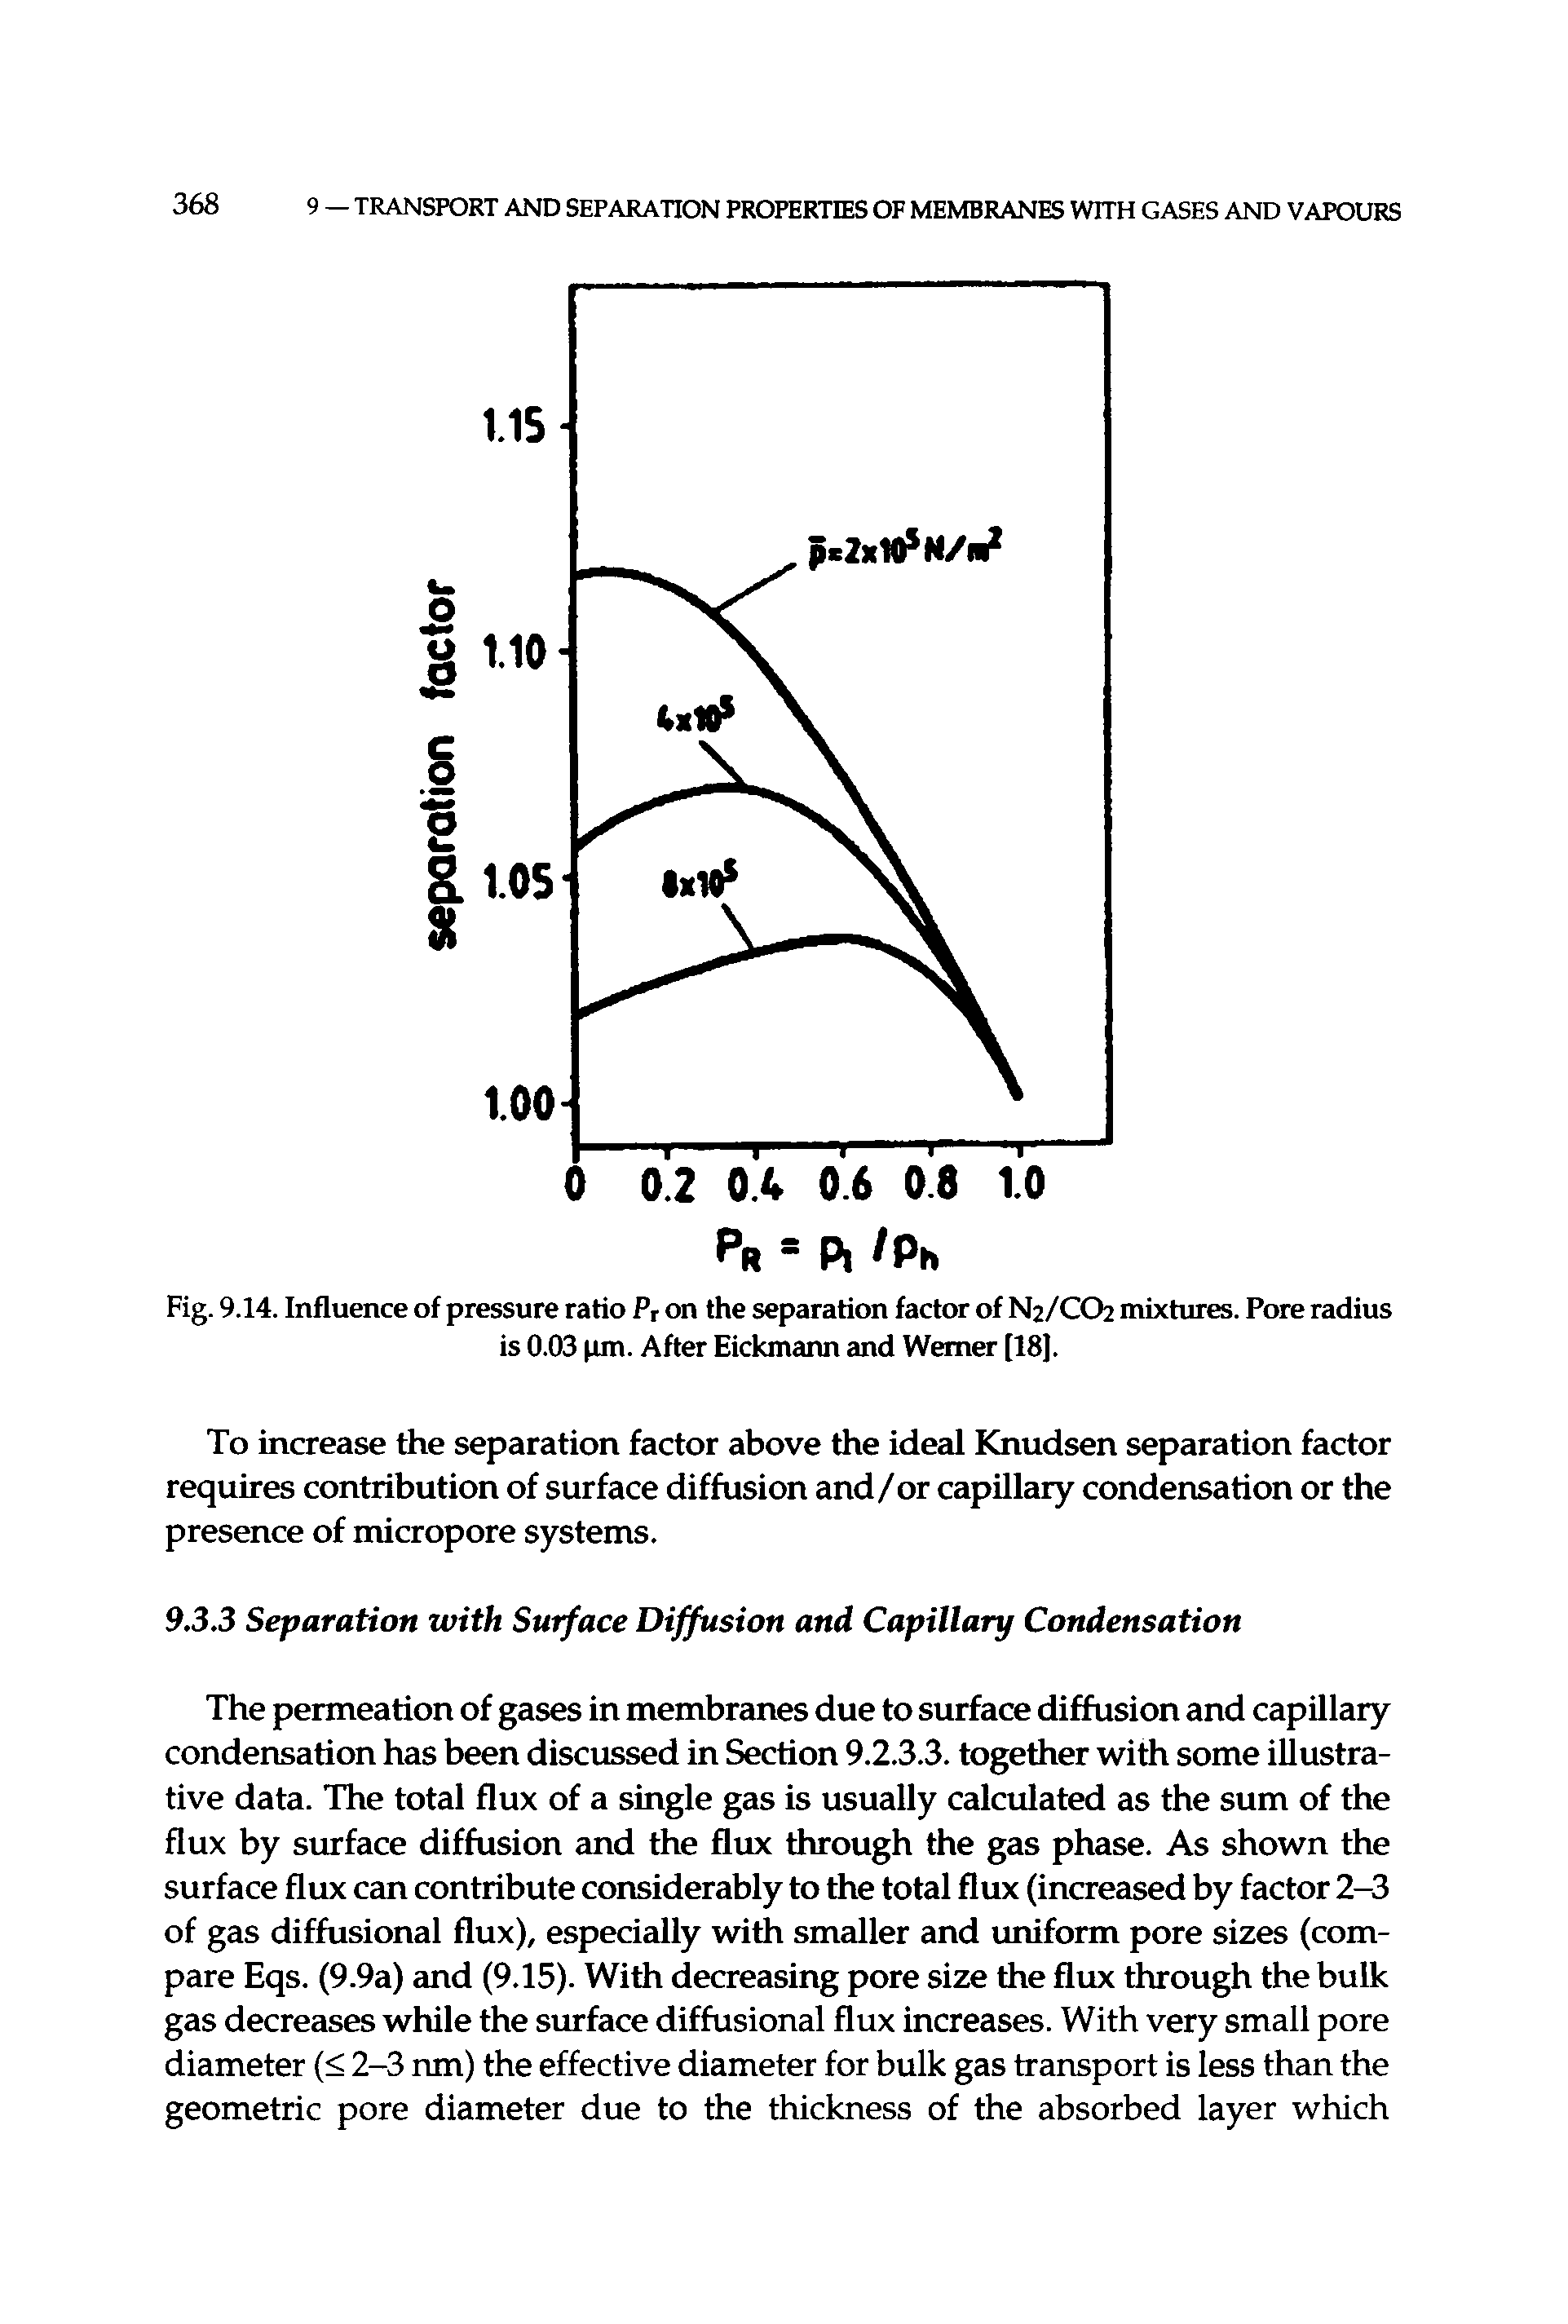 Fig. 9.14. Influence of pressure ratio P, on the separation factor of N2/CO2 mixtures. Pore radius is 0.03 (im. After Eickmann and Werner [18].